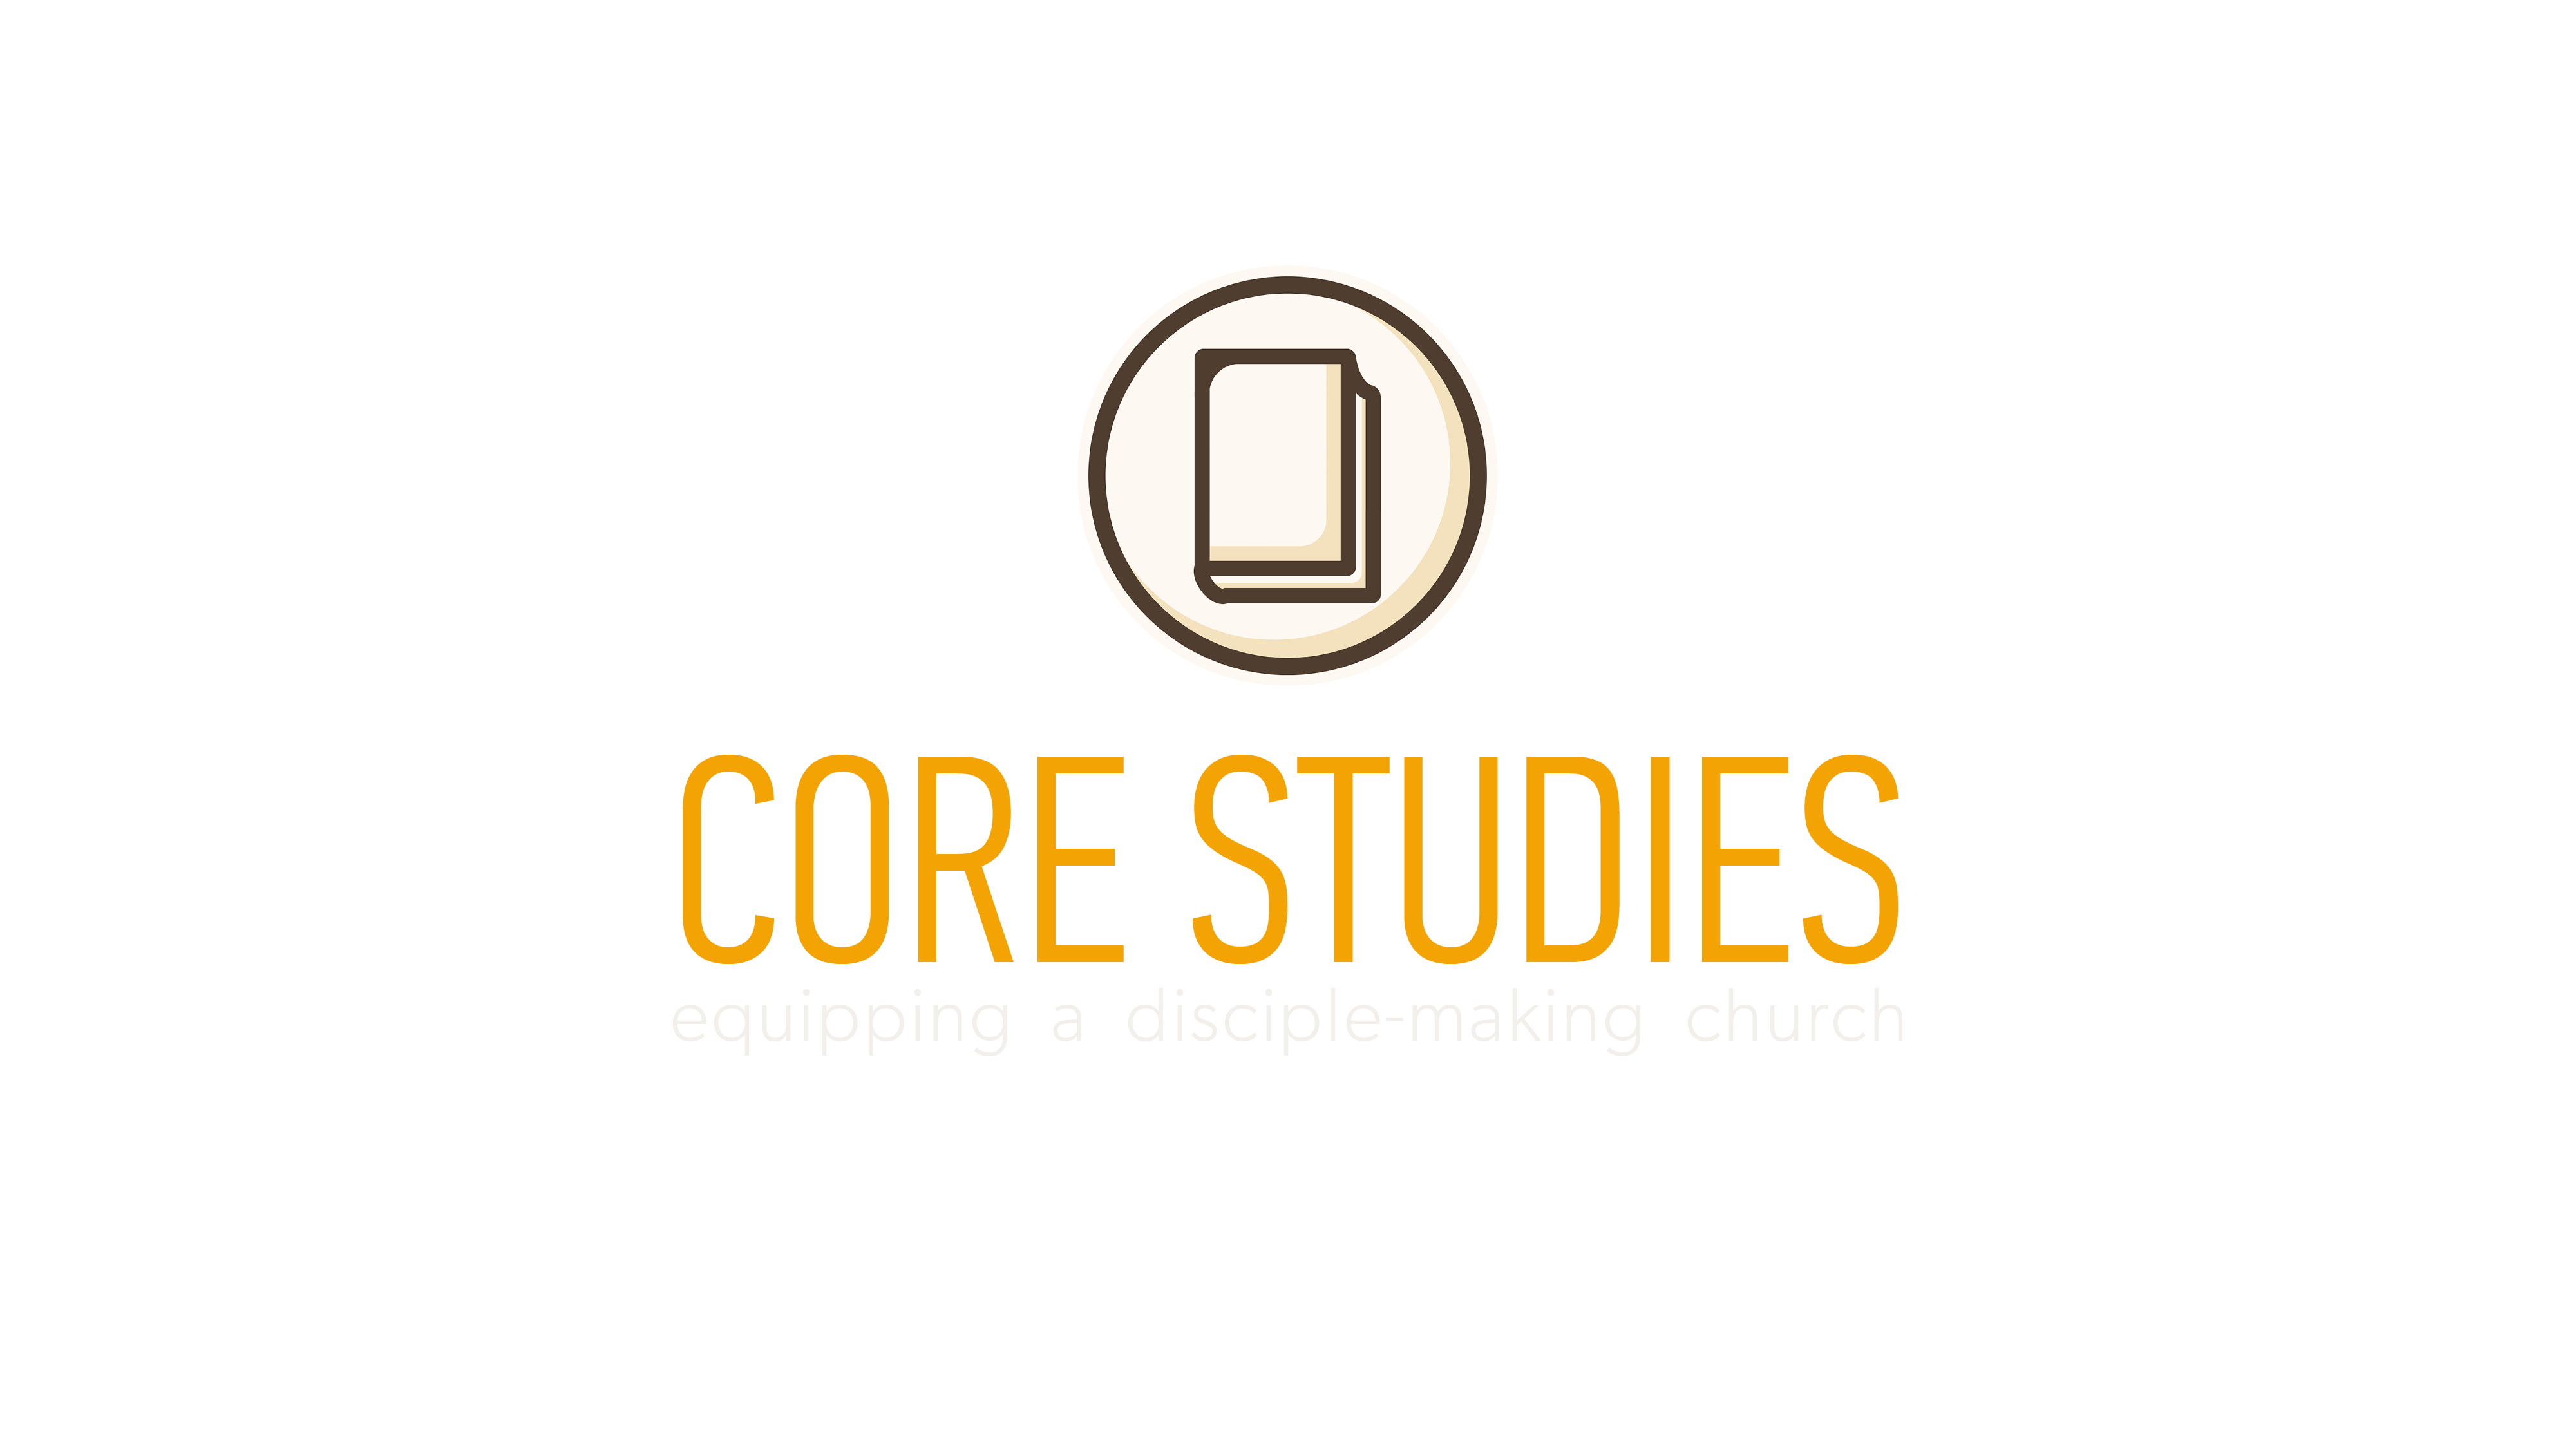 equipping a disciple-making church